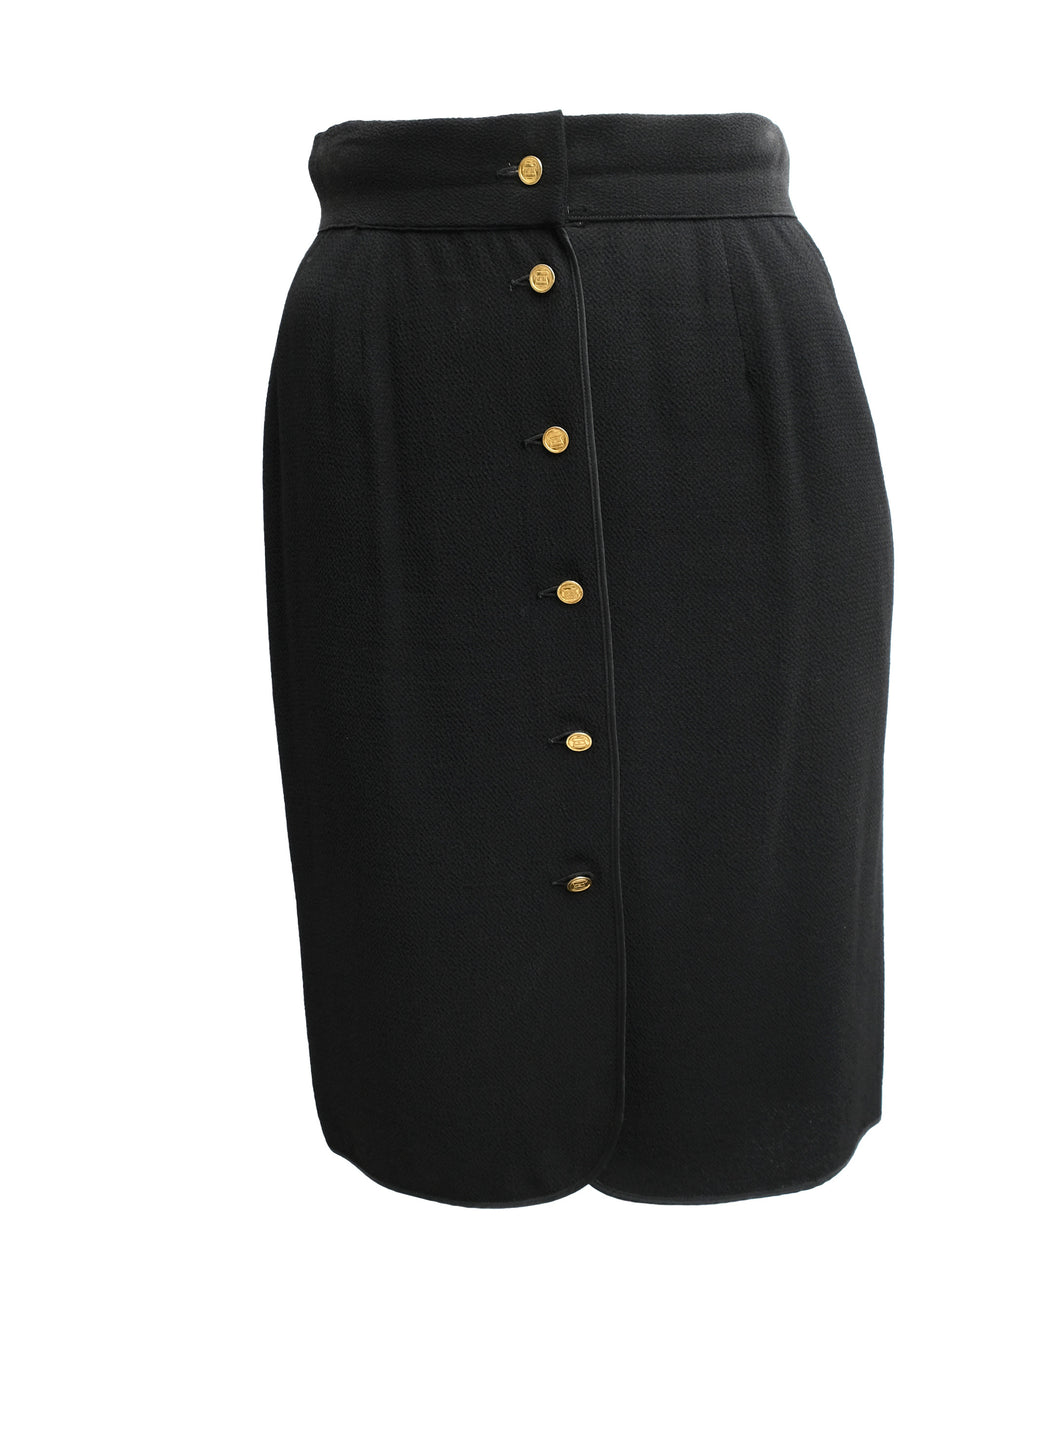 Chanel Vintage Button Through Skirt in Black Crepe with Gold Buttons, UK8